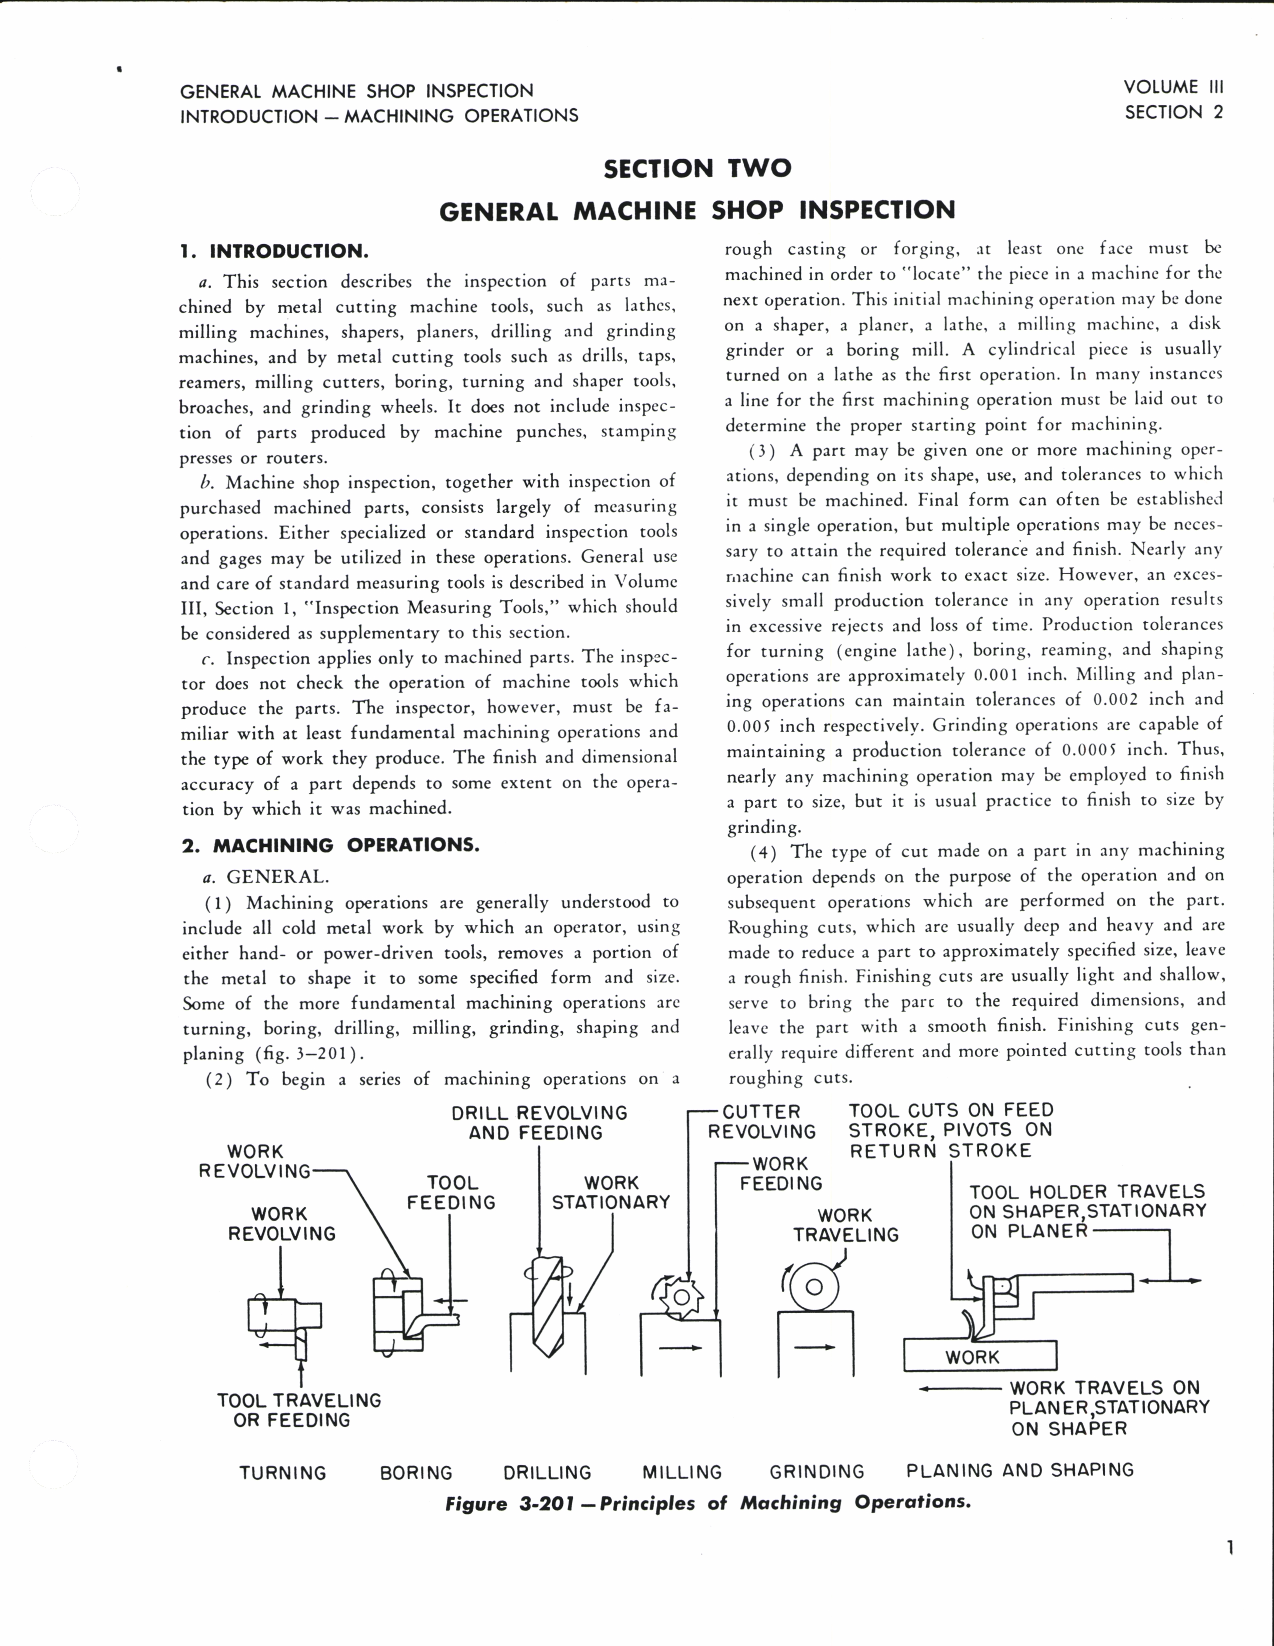 Sample page 5 from AirCorps Library document: Aeronautical Technical Inspection Manual - General Machine Shop and Preliminary Aircraft Production Inspection